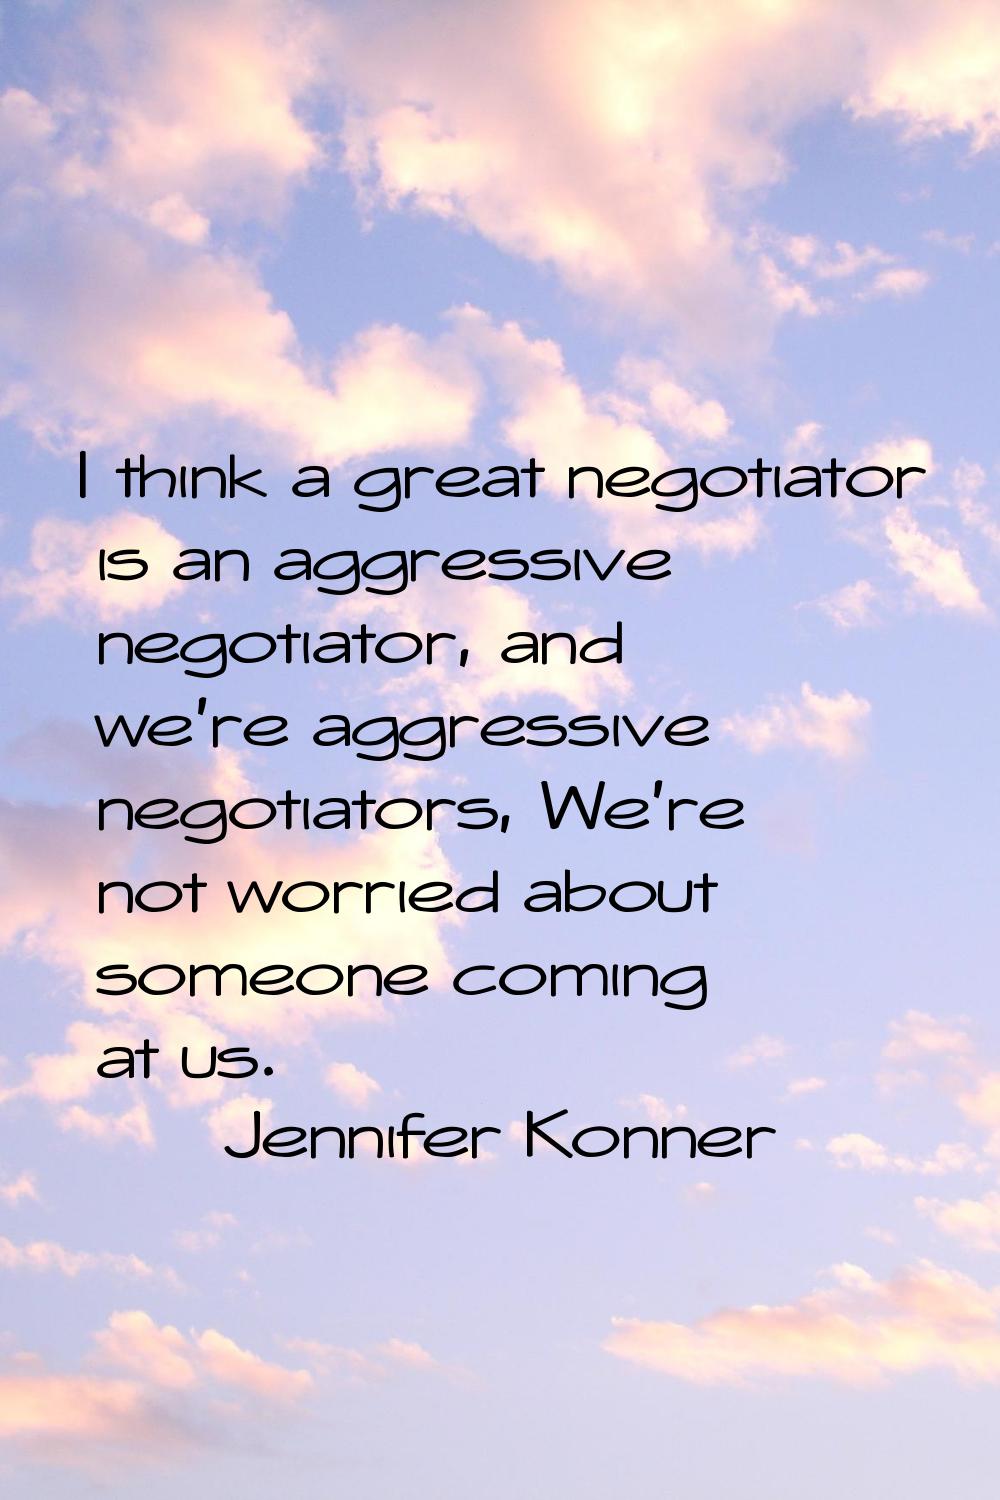 I think a great negotiator is an aggressive negotiator, and we're aggressive negotiators, We're not